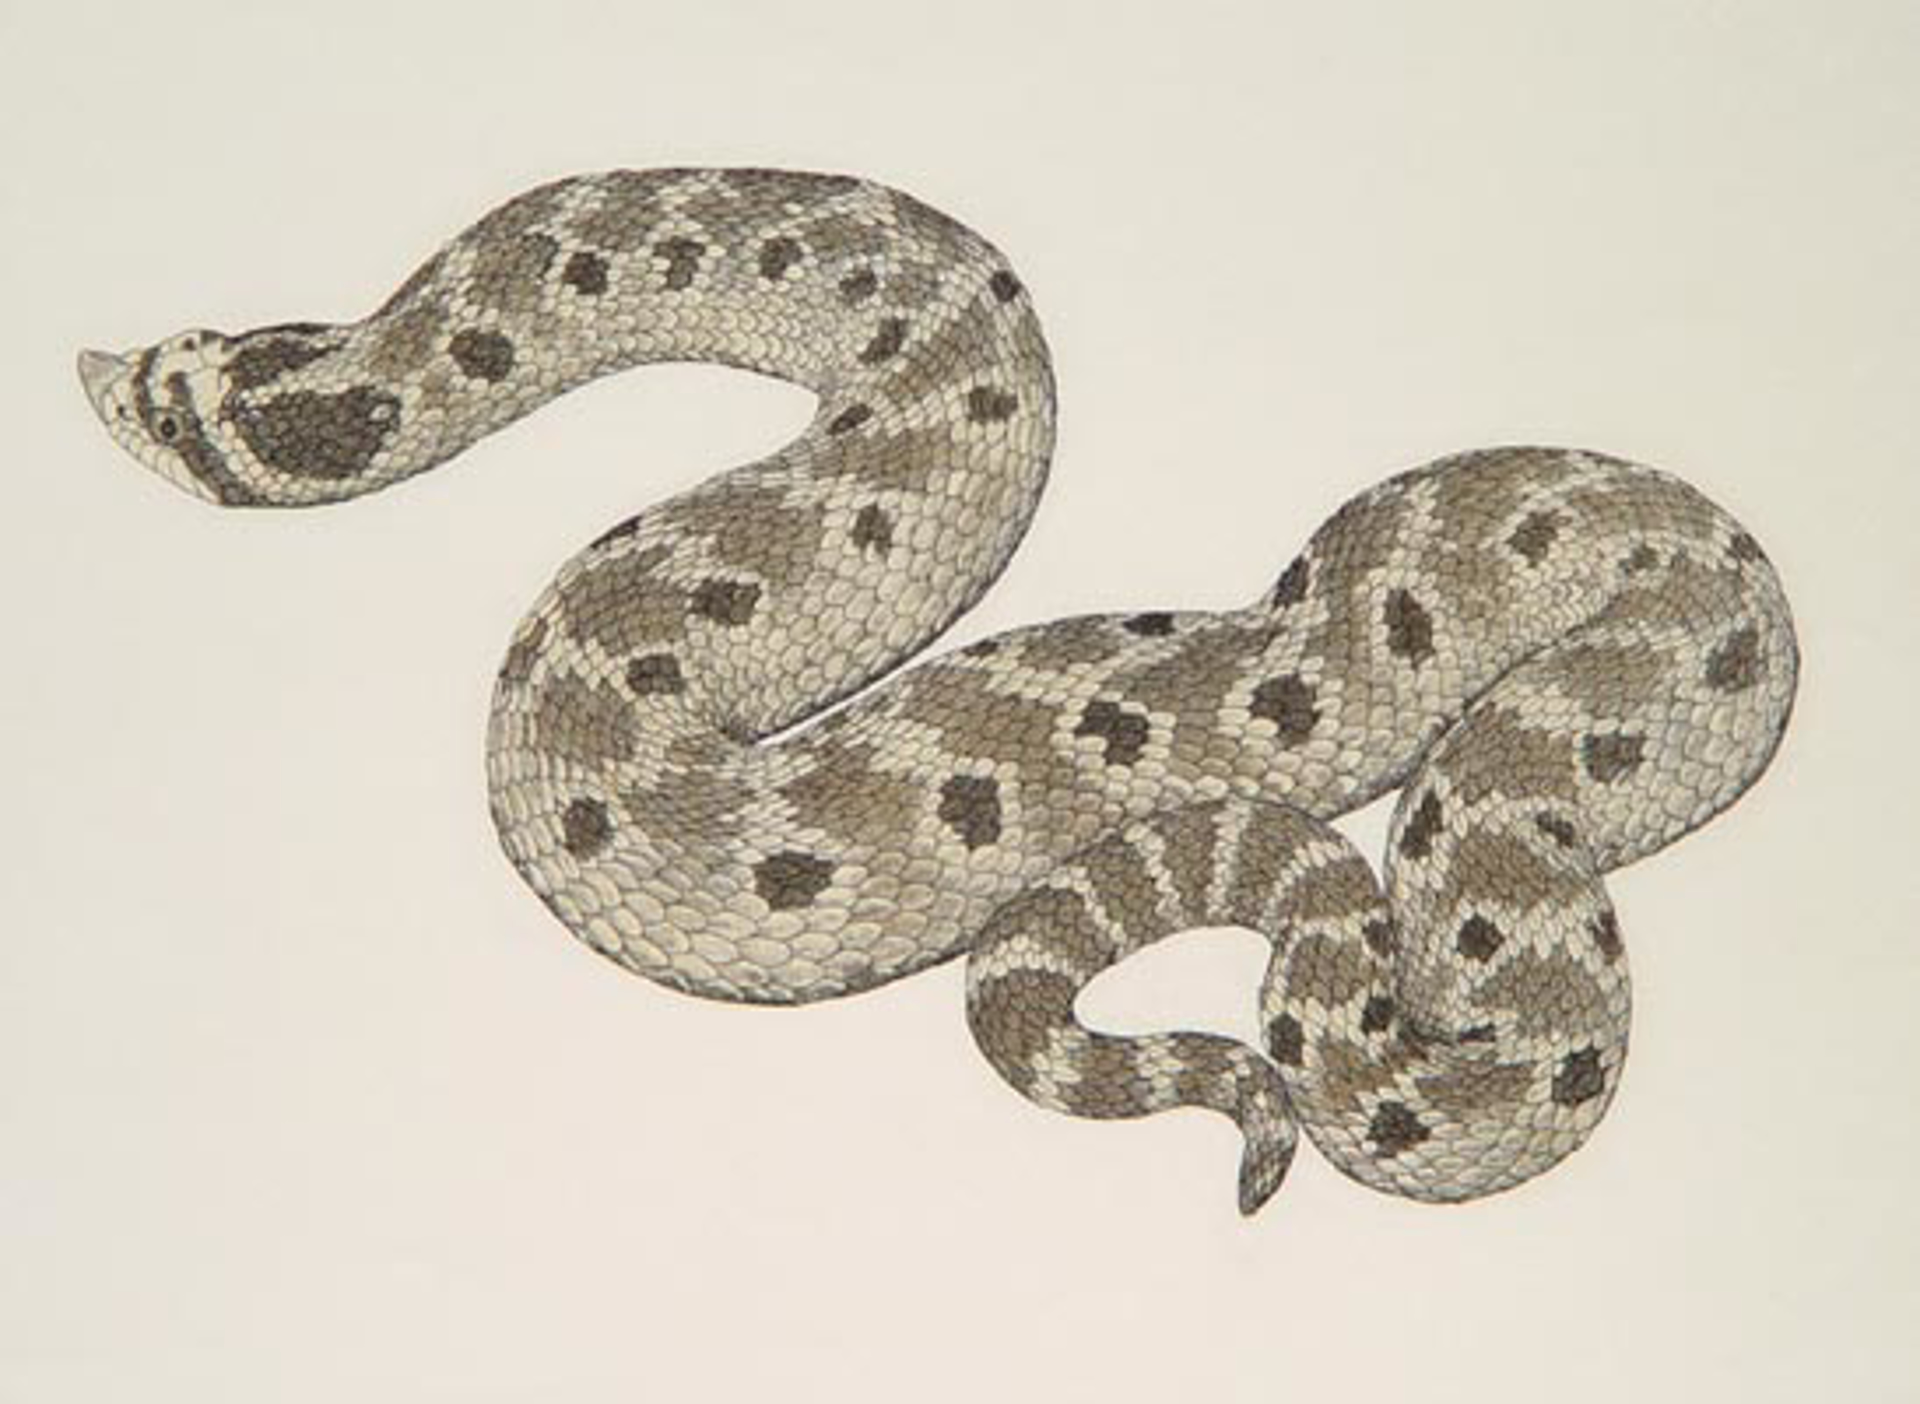 Mexican Hognose Snake by William Montgomery Prints